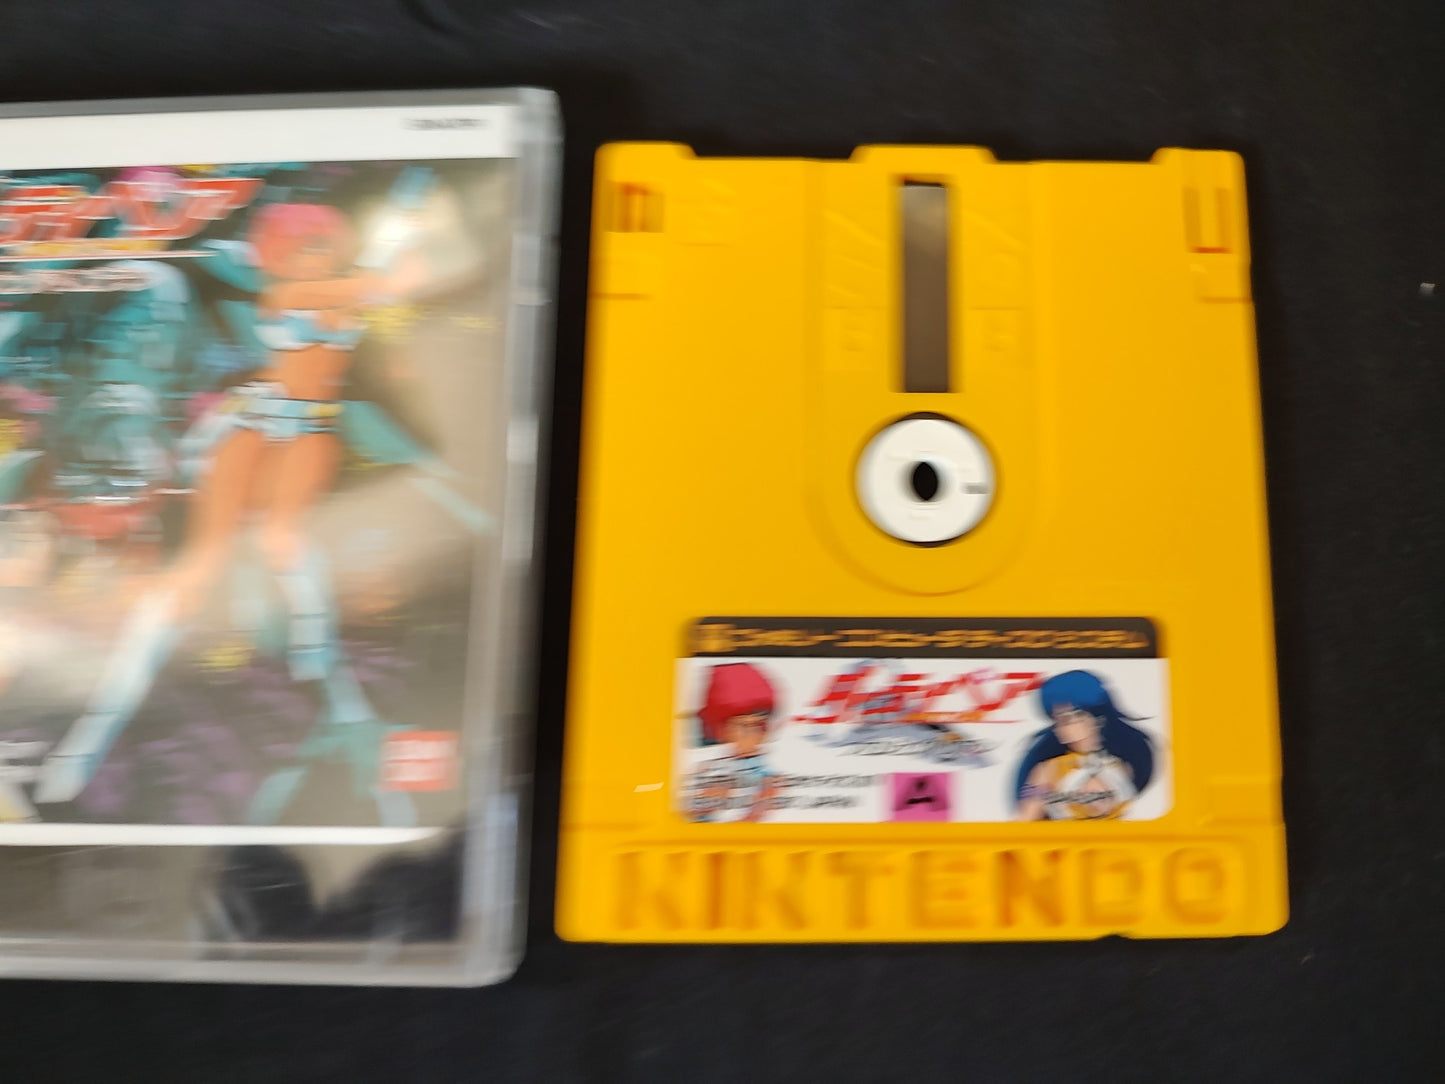 DIRTY PAIR FAMICOM (NES) Disk System, Game disk set, tested-f0515-